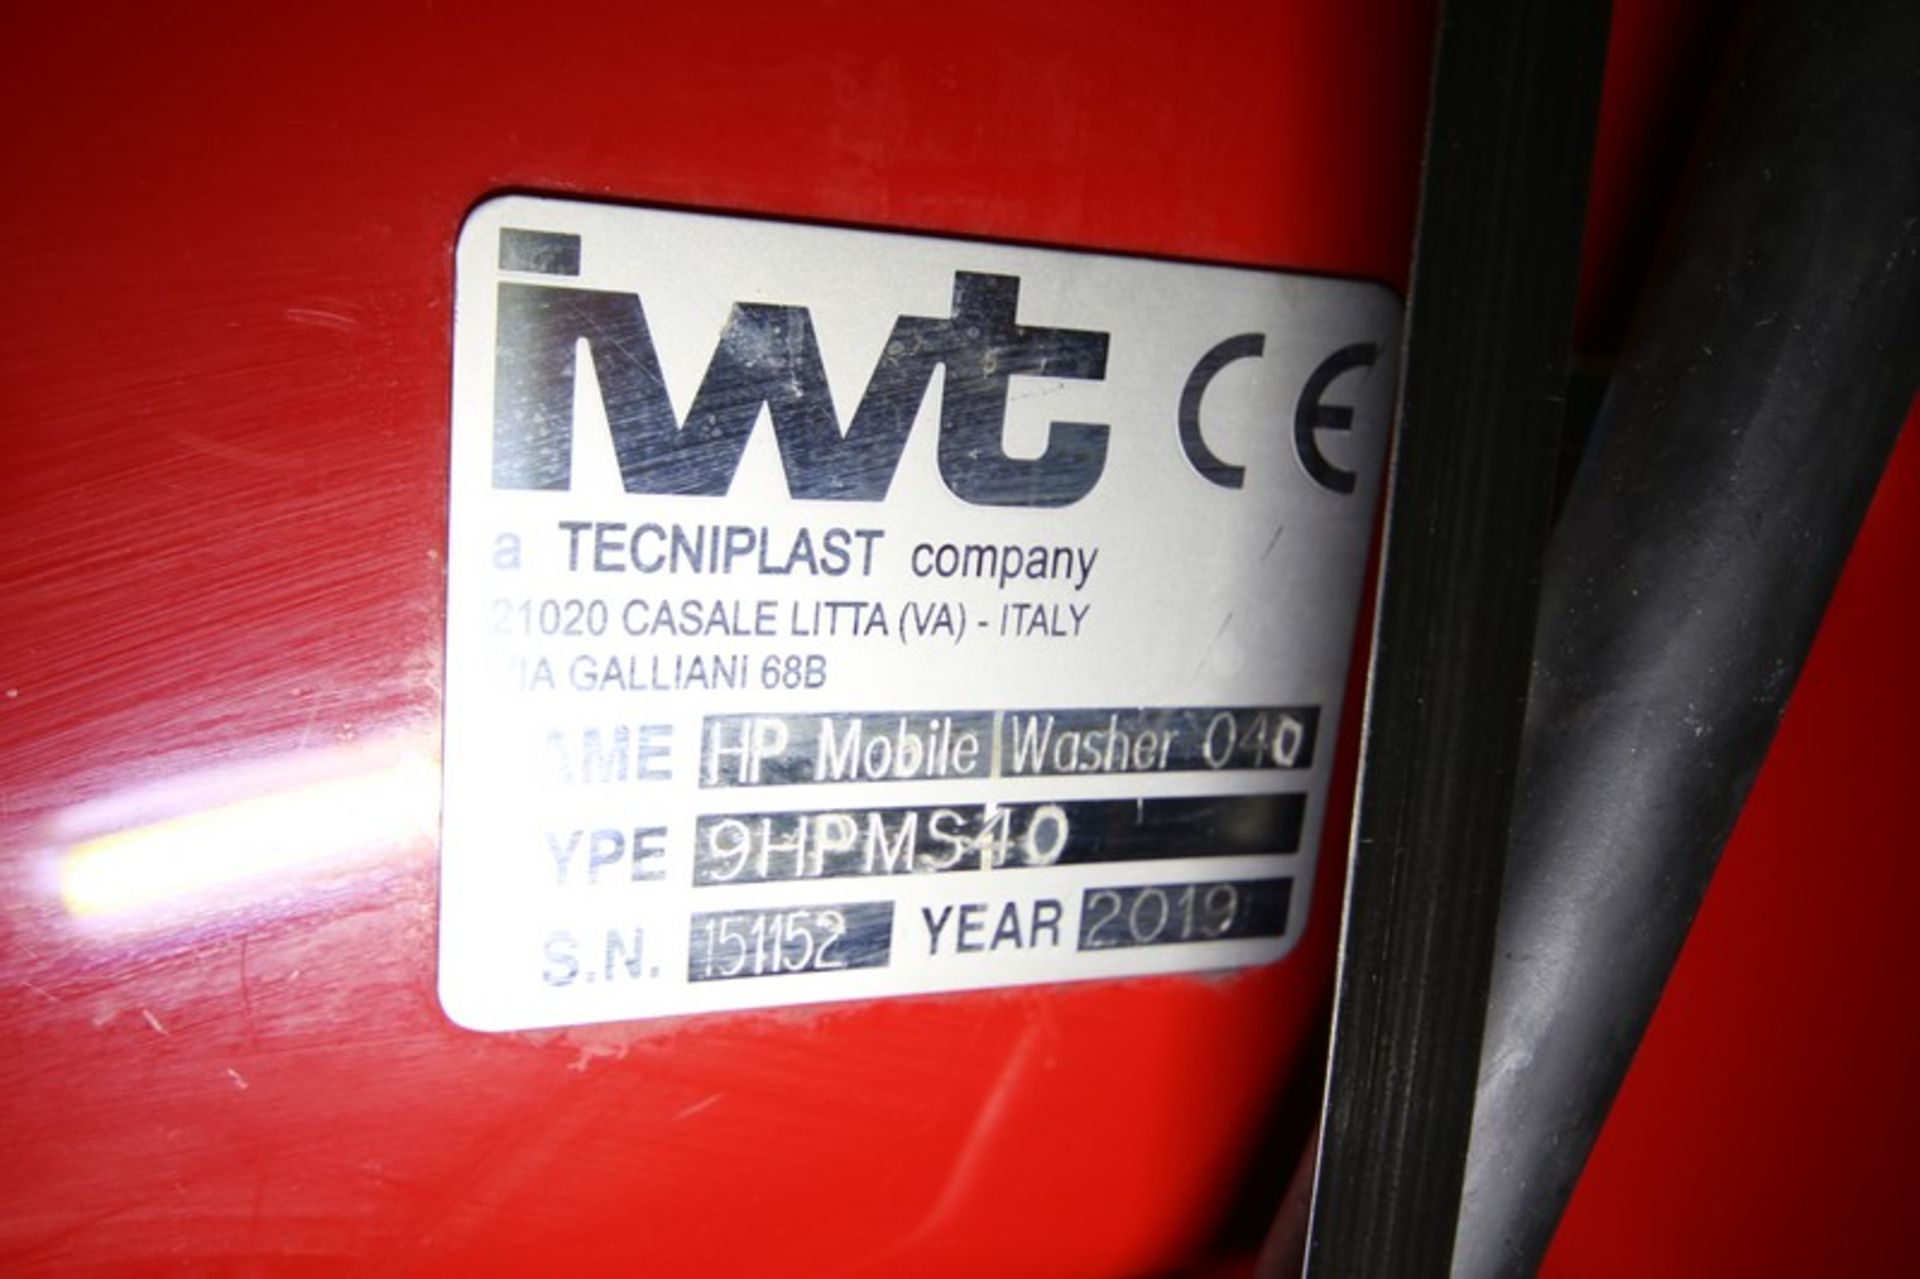 2019 IWT / M - Line High Pressure Mobile Washer 040, Type 9HPMS40, SN 151152, with Touch Pad - Image 7 of 10